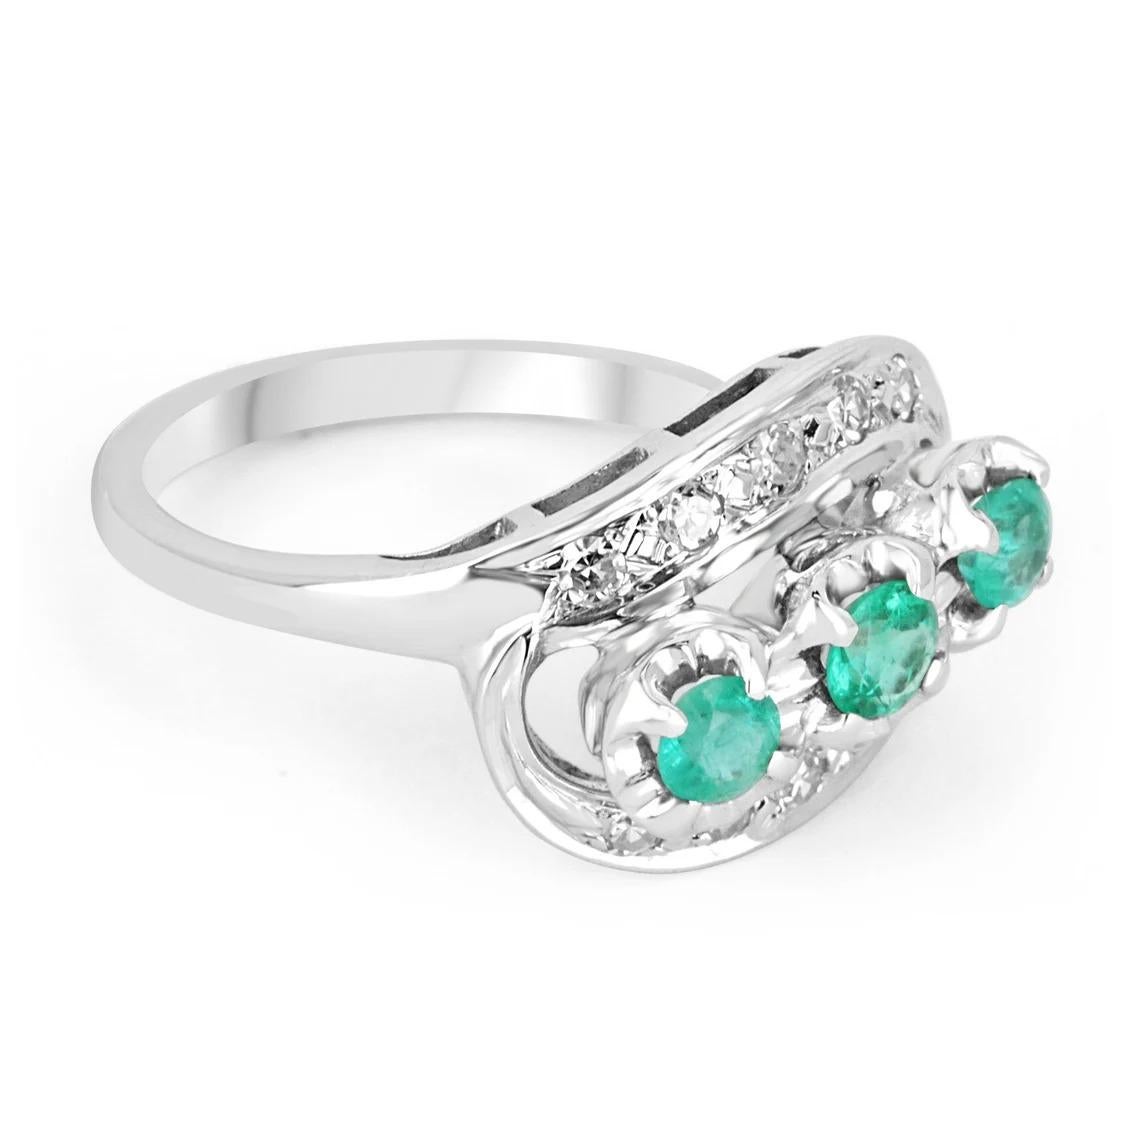 Displayed is a 0.76tcw vintage Colombian emerald and diamond ring. This is a perfect statement ring with three round emeralds. The emeralds are of good, varying quality and are handset in a 14K white gold prong setting. The bluish-green color is